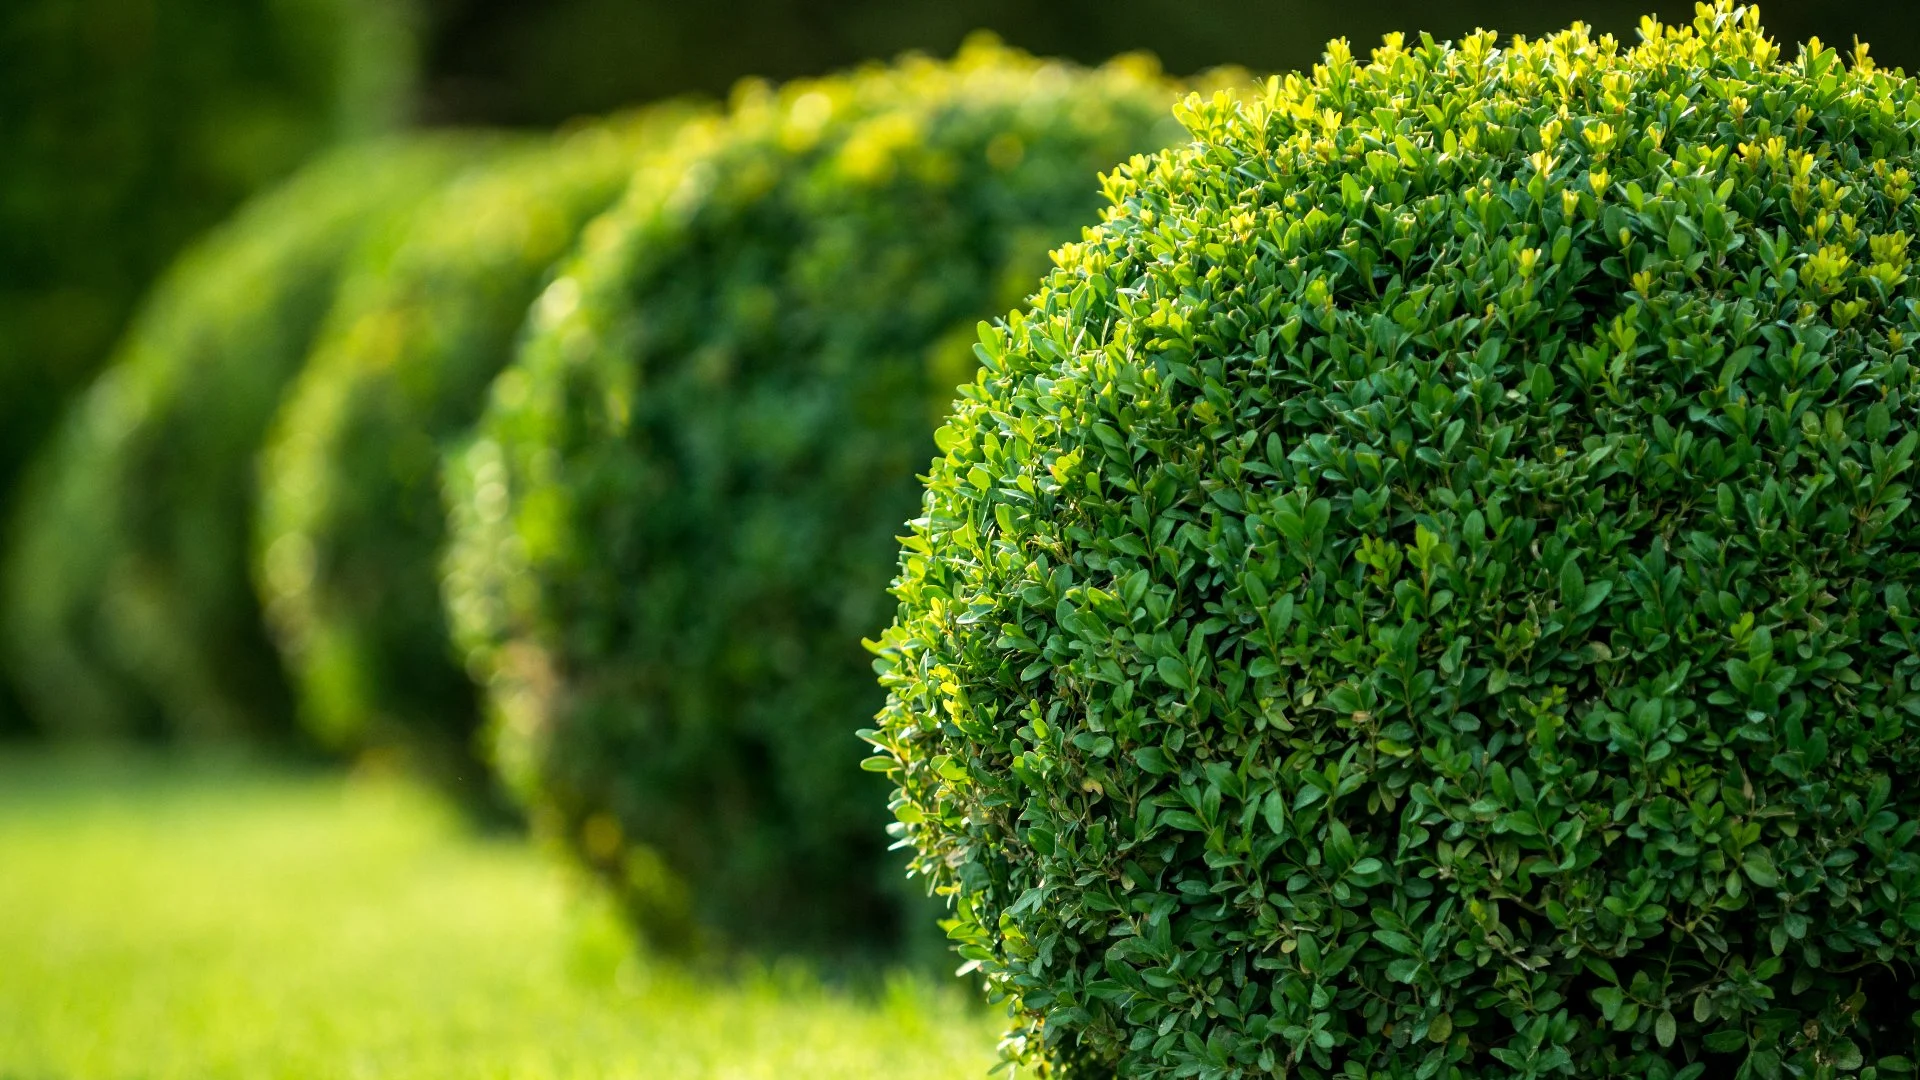 Trimming & Pruning - What’s the Difference & When Should They Be Performed?